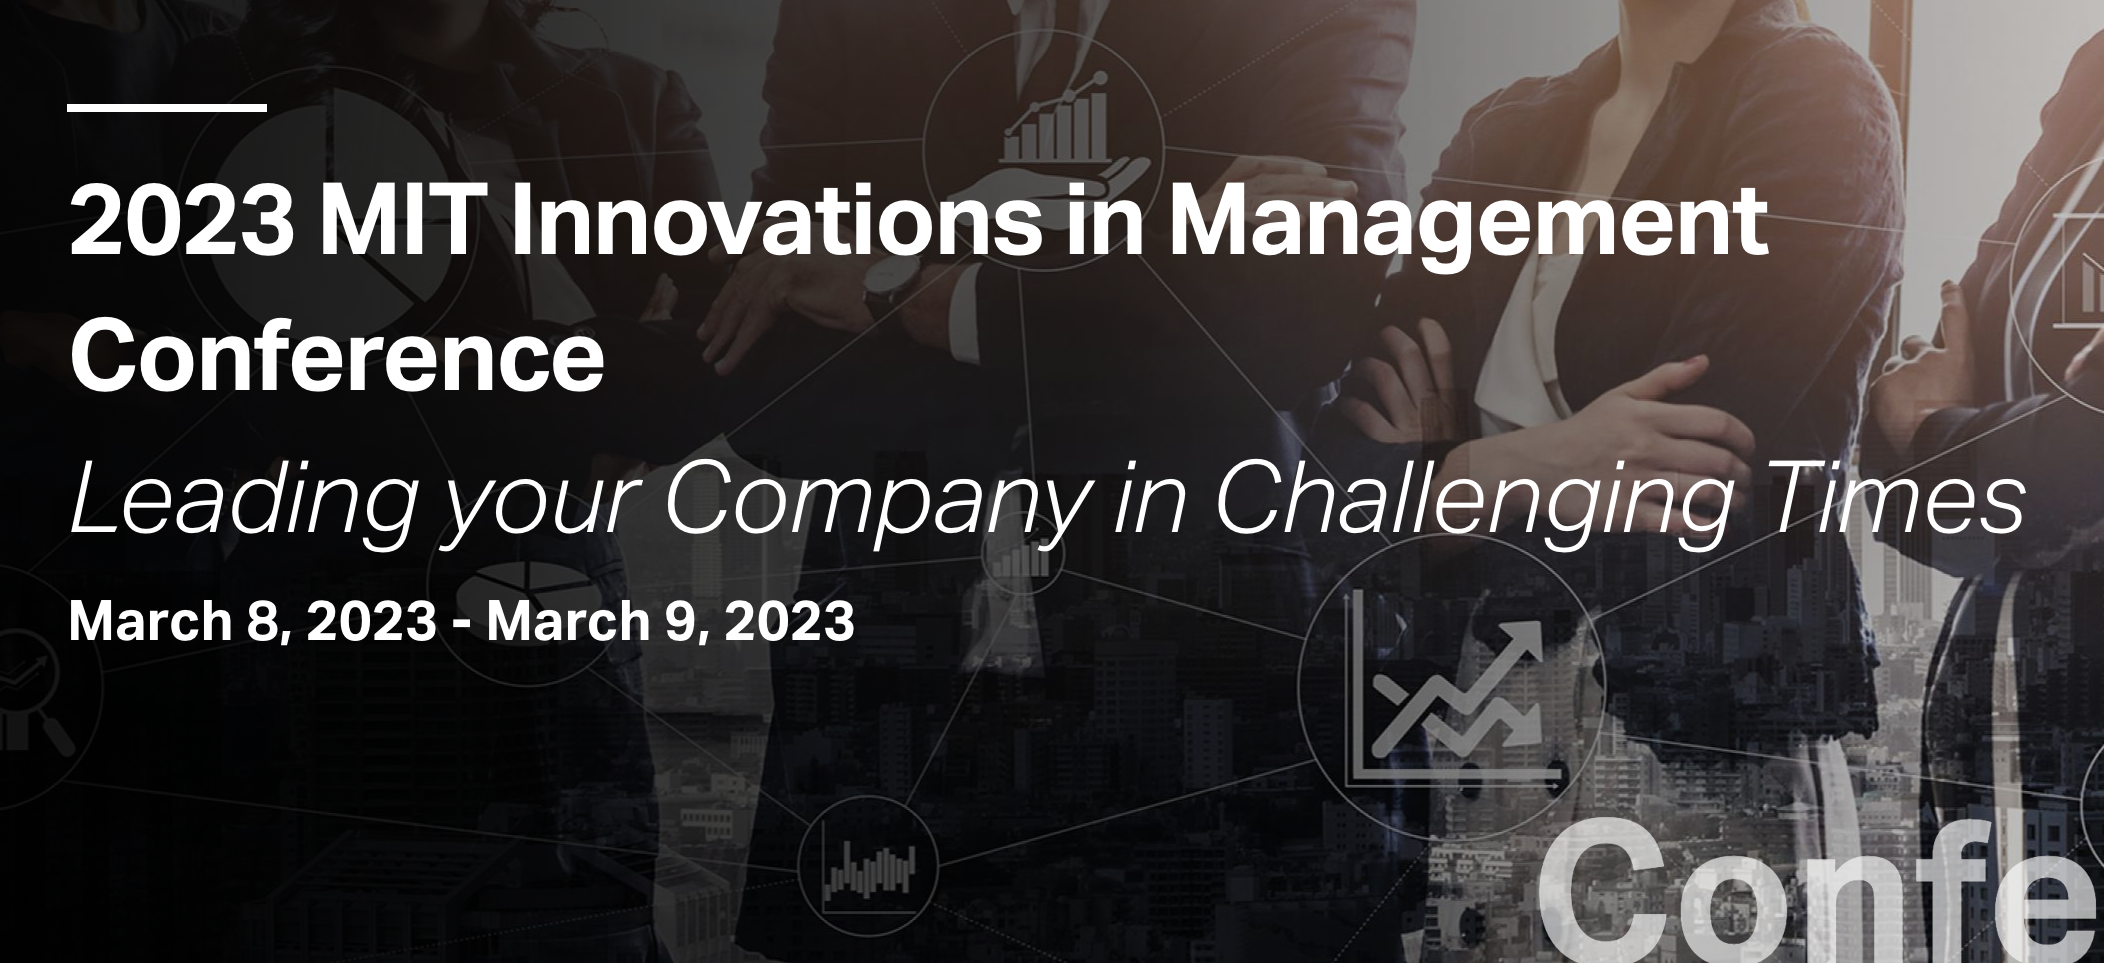 2023 MIT Innovations in Management Conference 